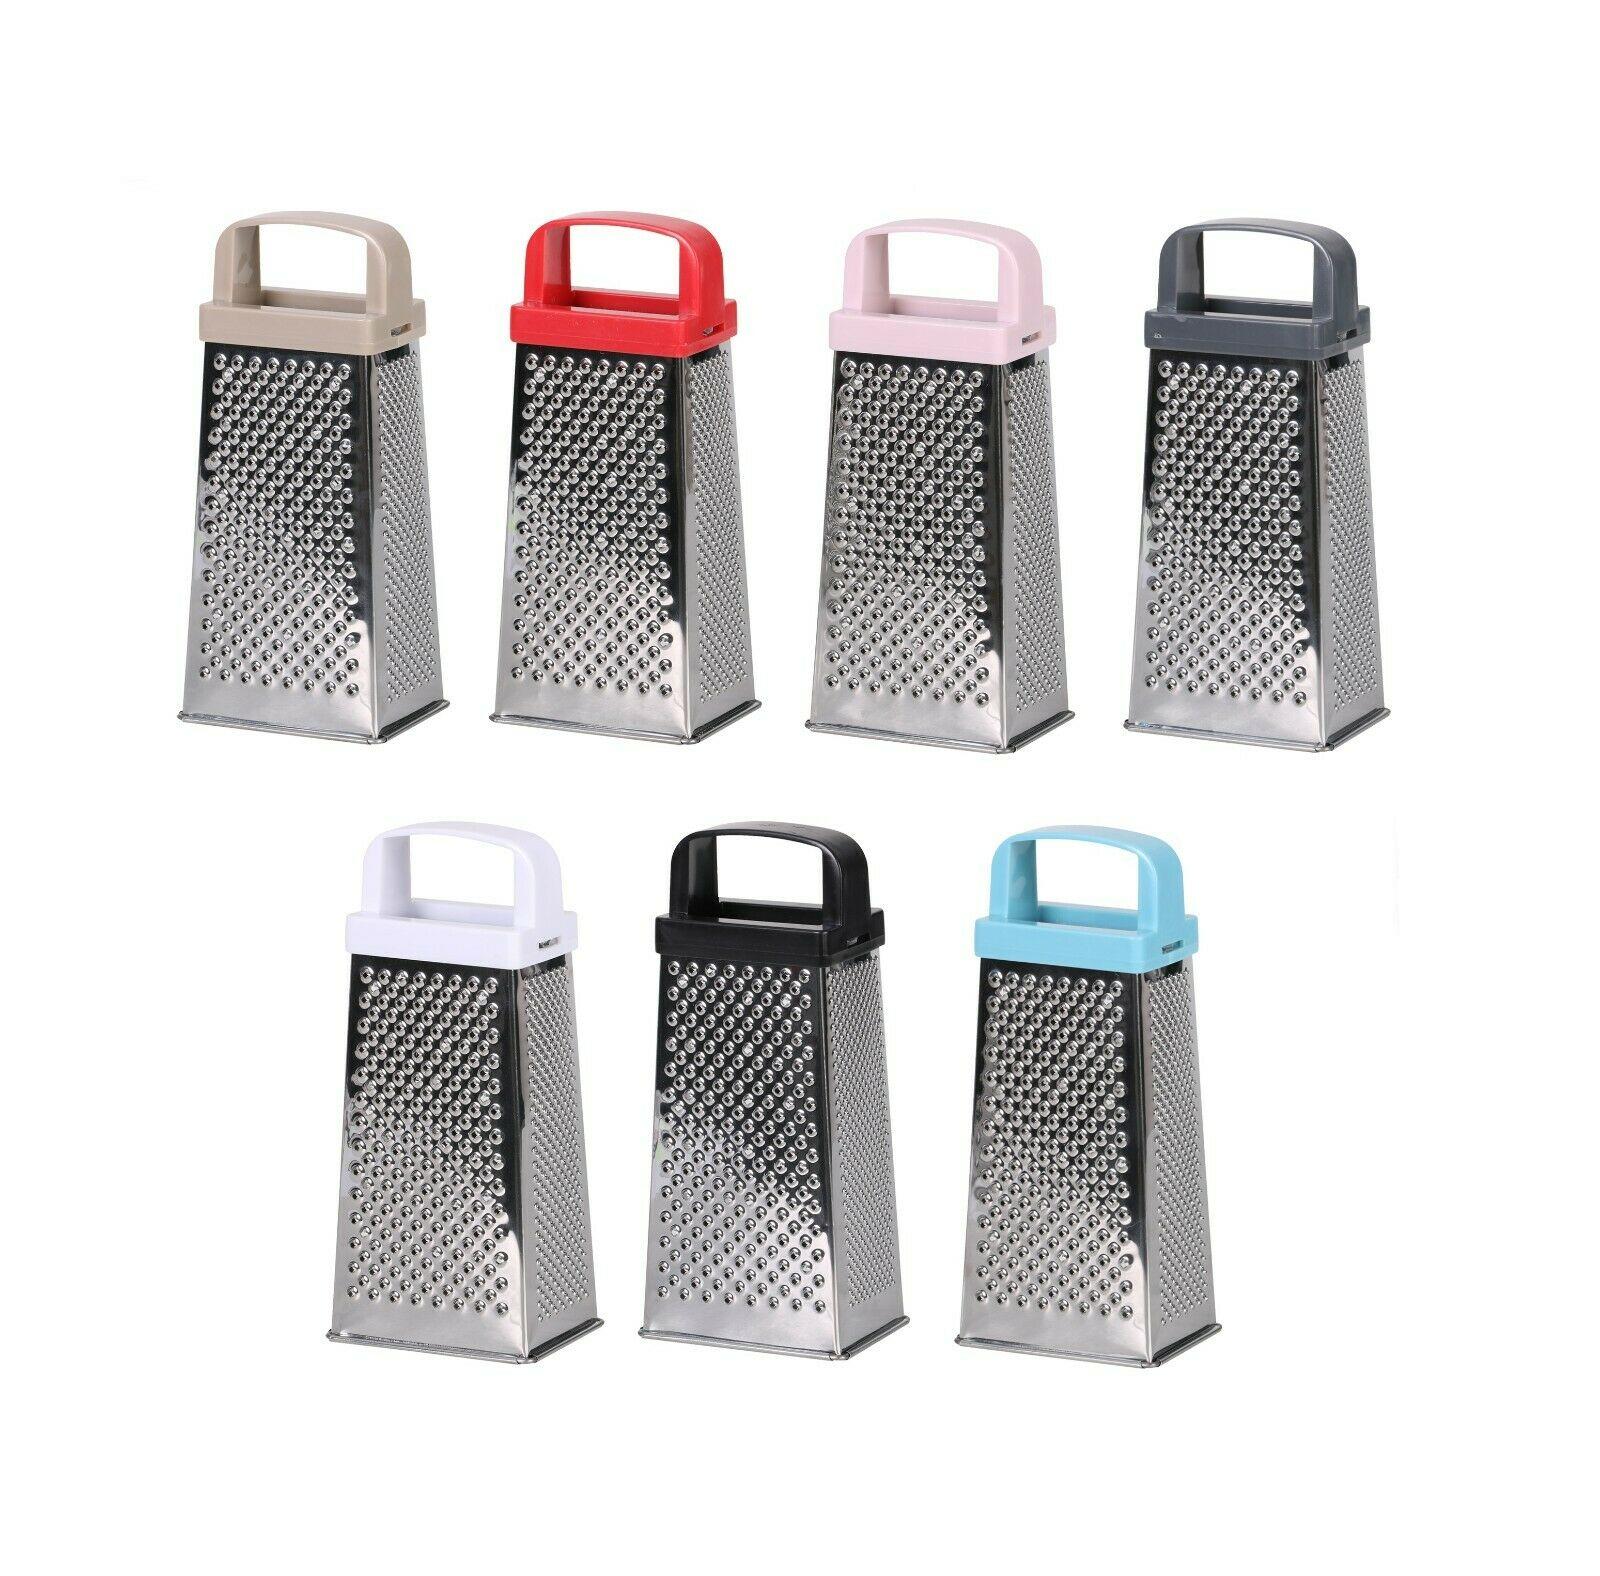 Commercial Rectangular Stainless Steel Flat Cheese Grater